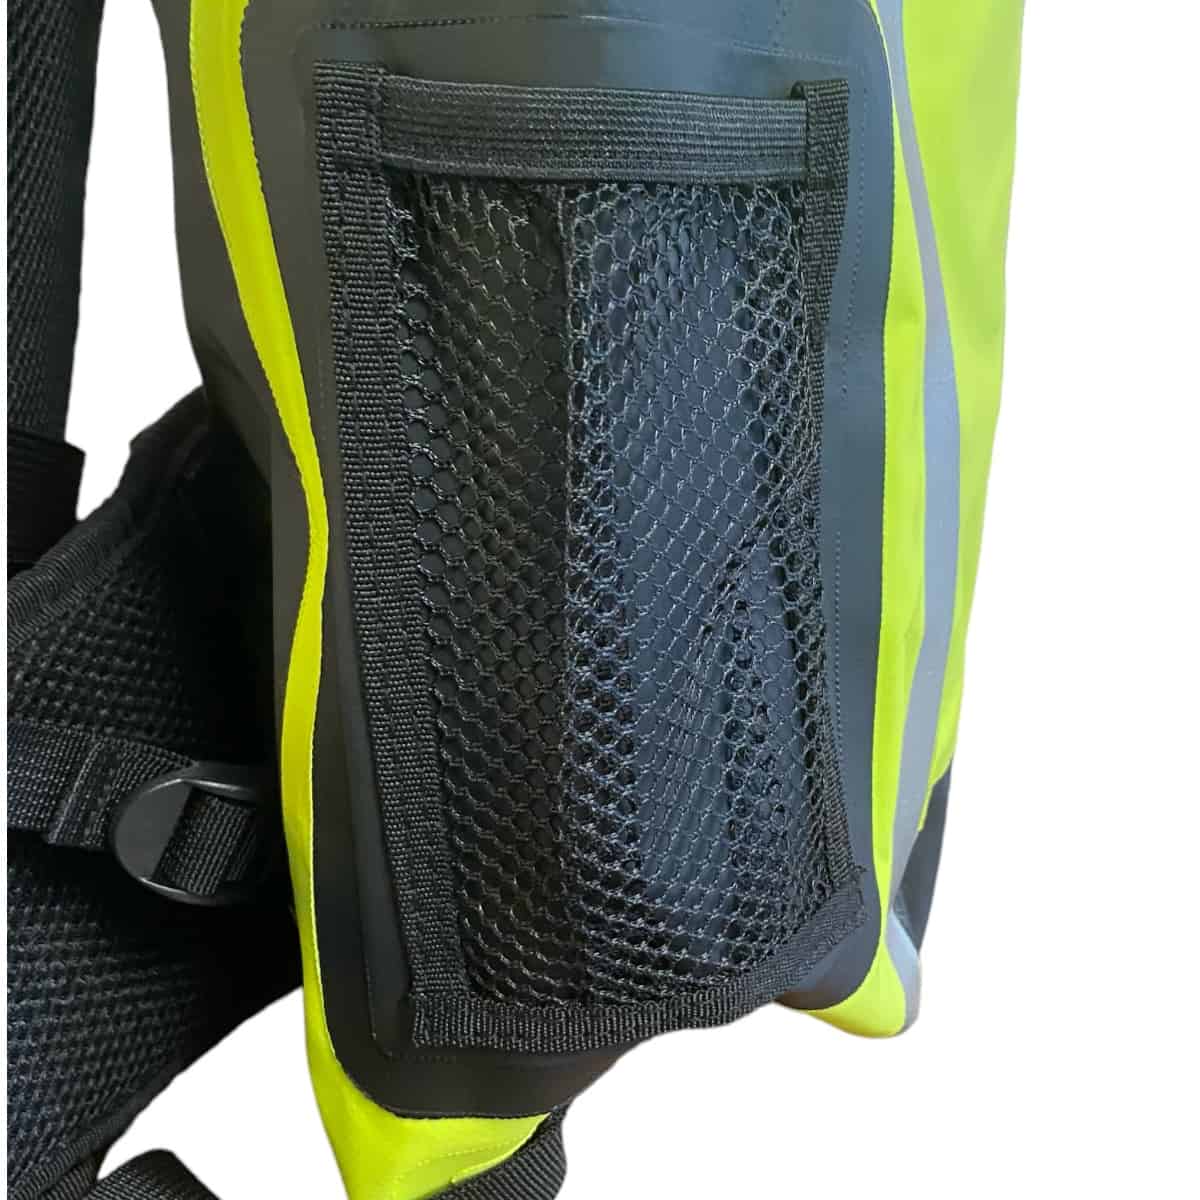 Get Ready For Any Adventure with Oxford's Aqua B-25 Hydro Backpack - mesh pockets